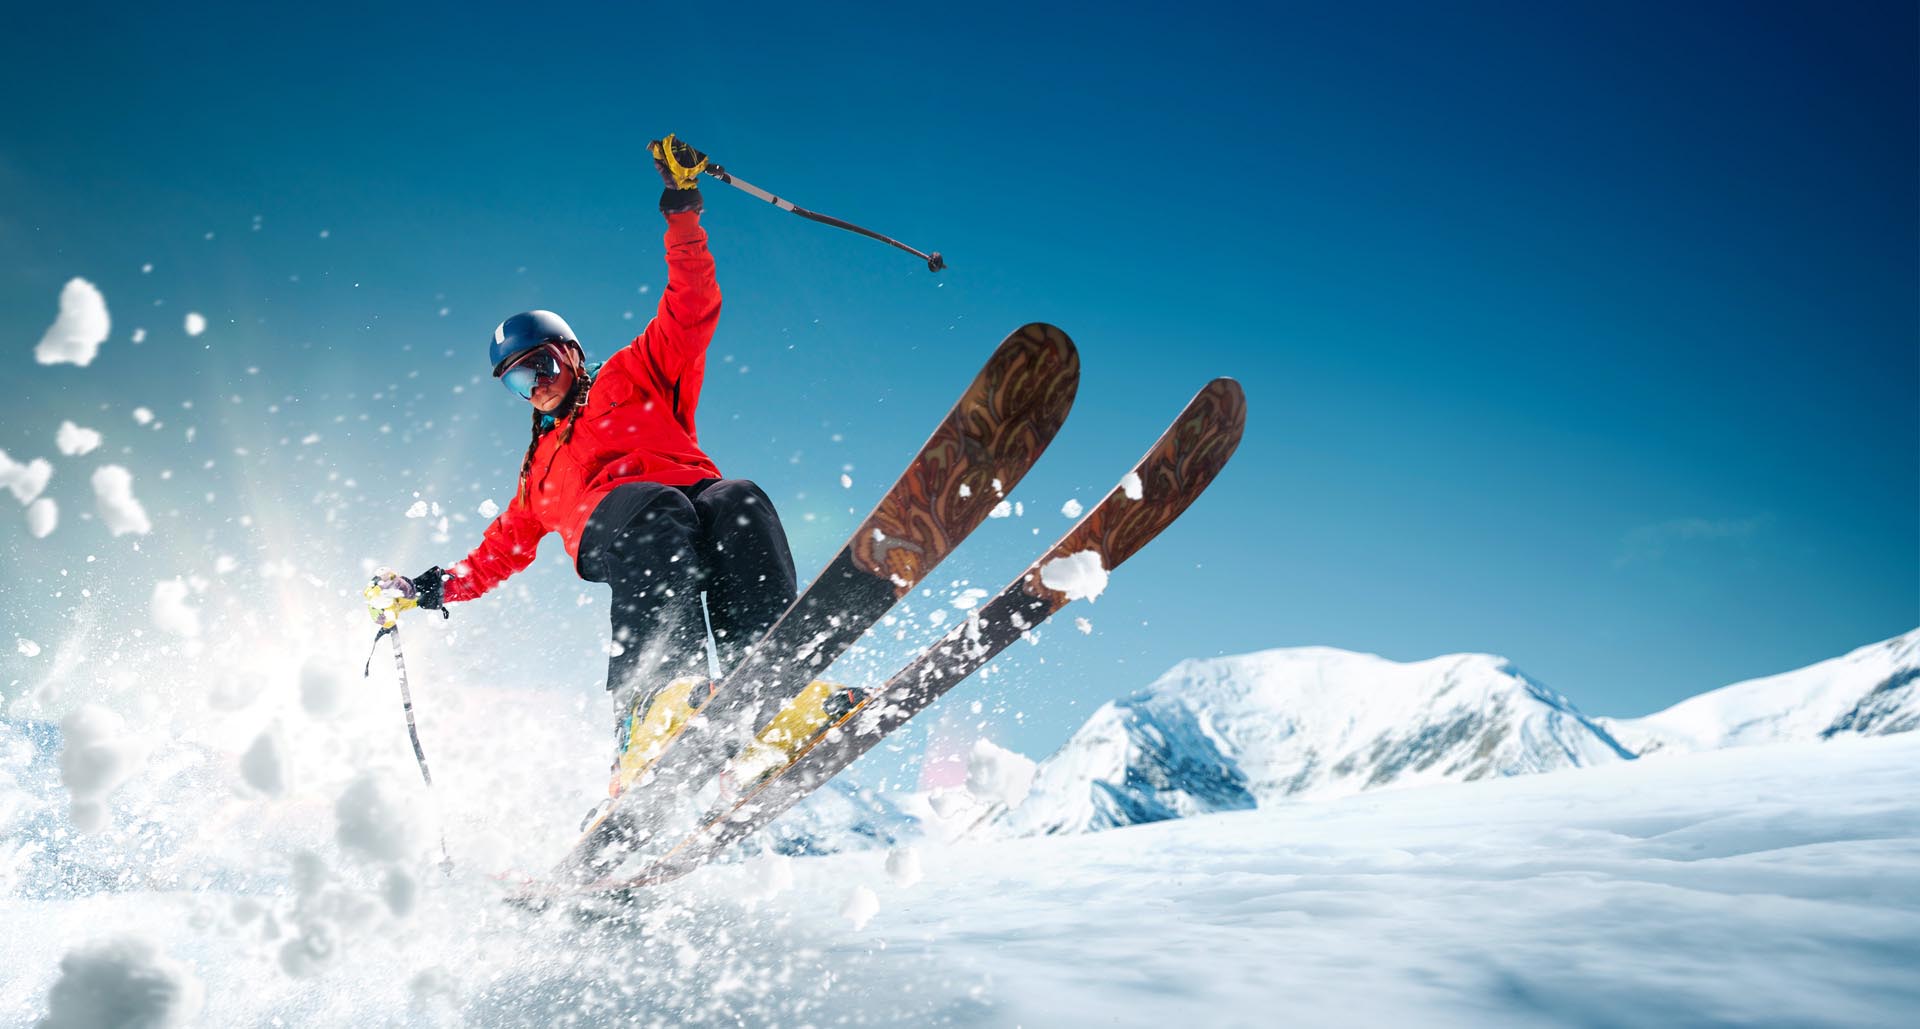 skiing.-jumping-skier-extreme-winter-sports-1